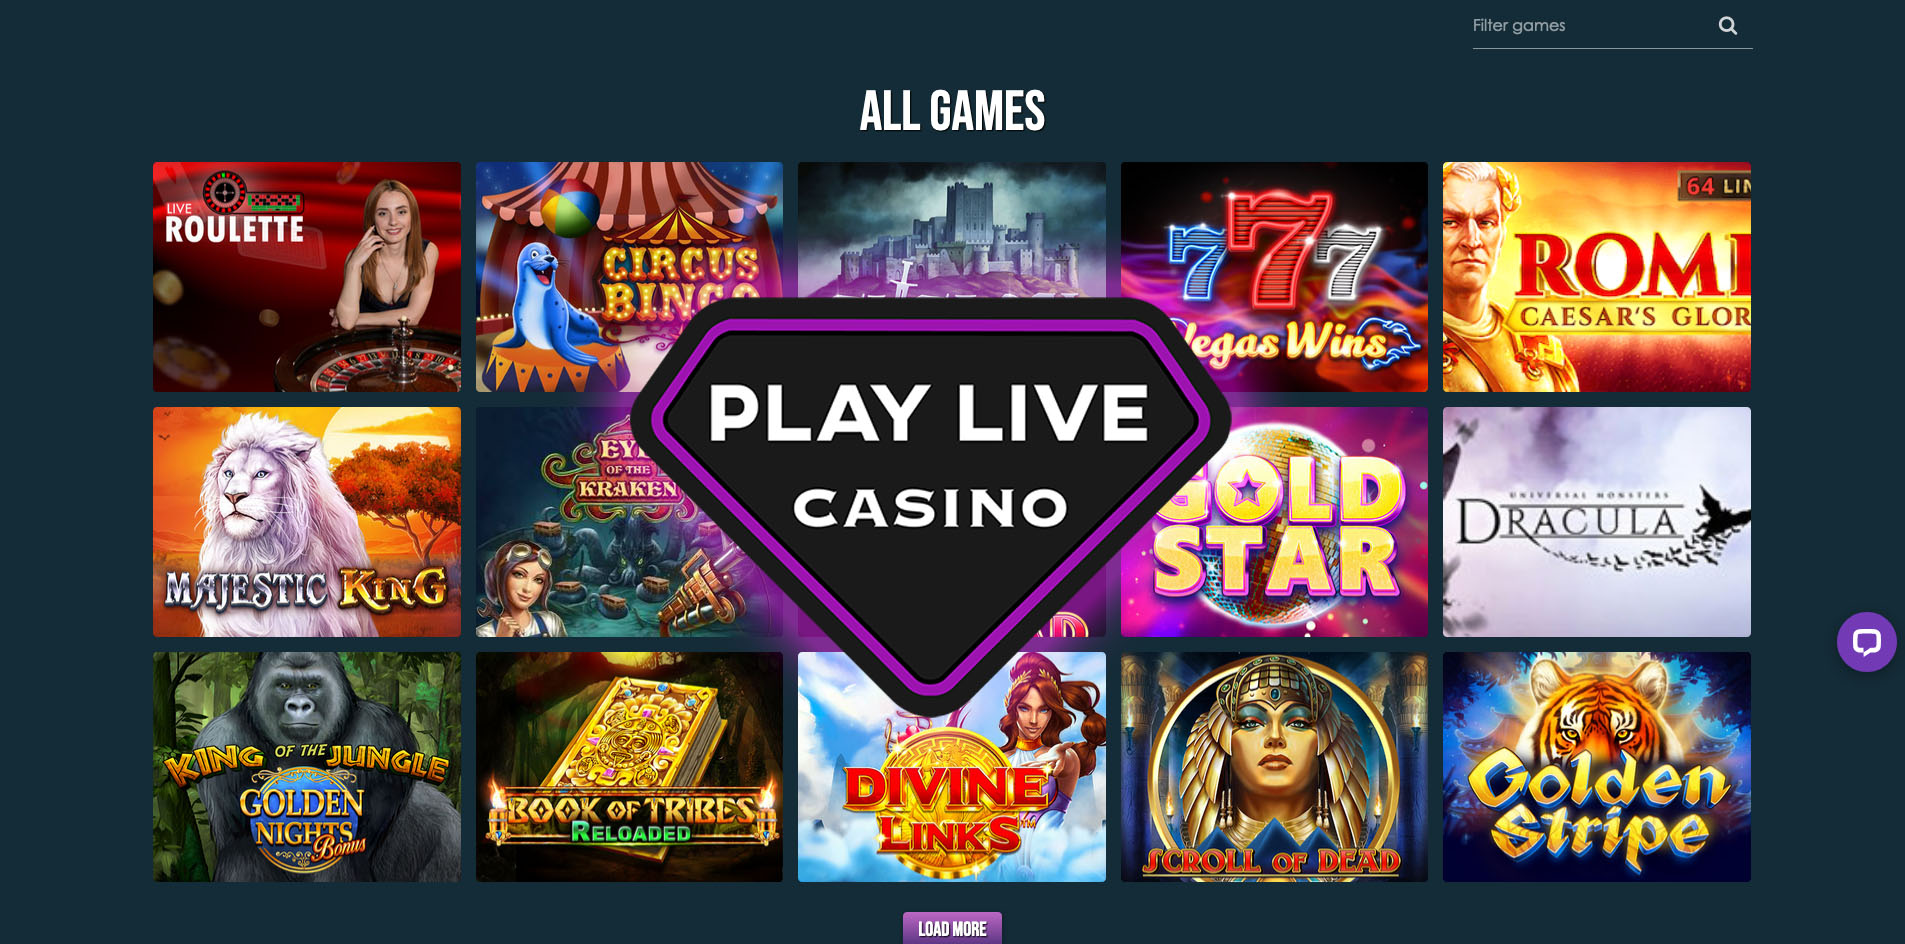 PlayLive games | What games does PlayLive offer?